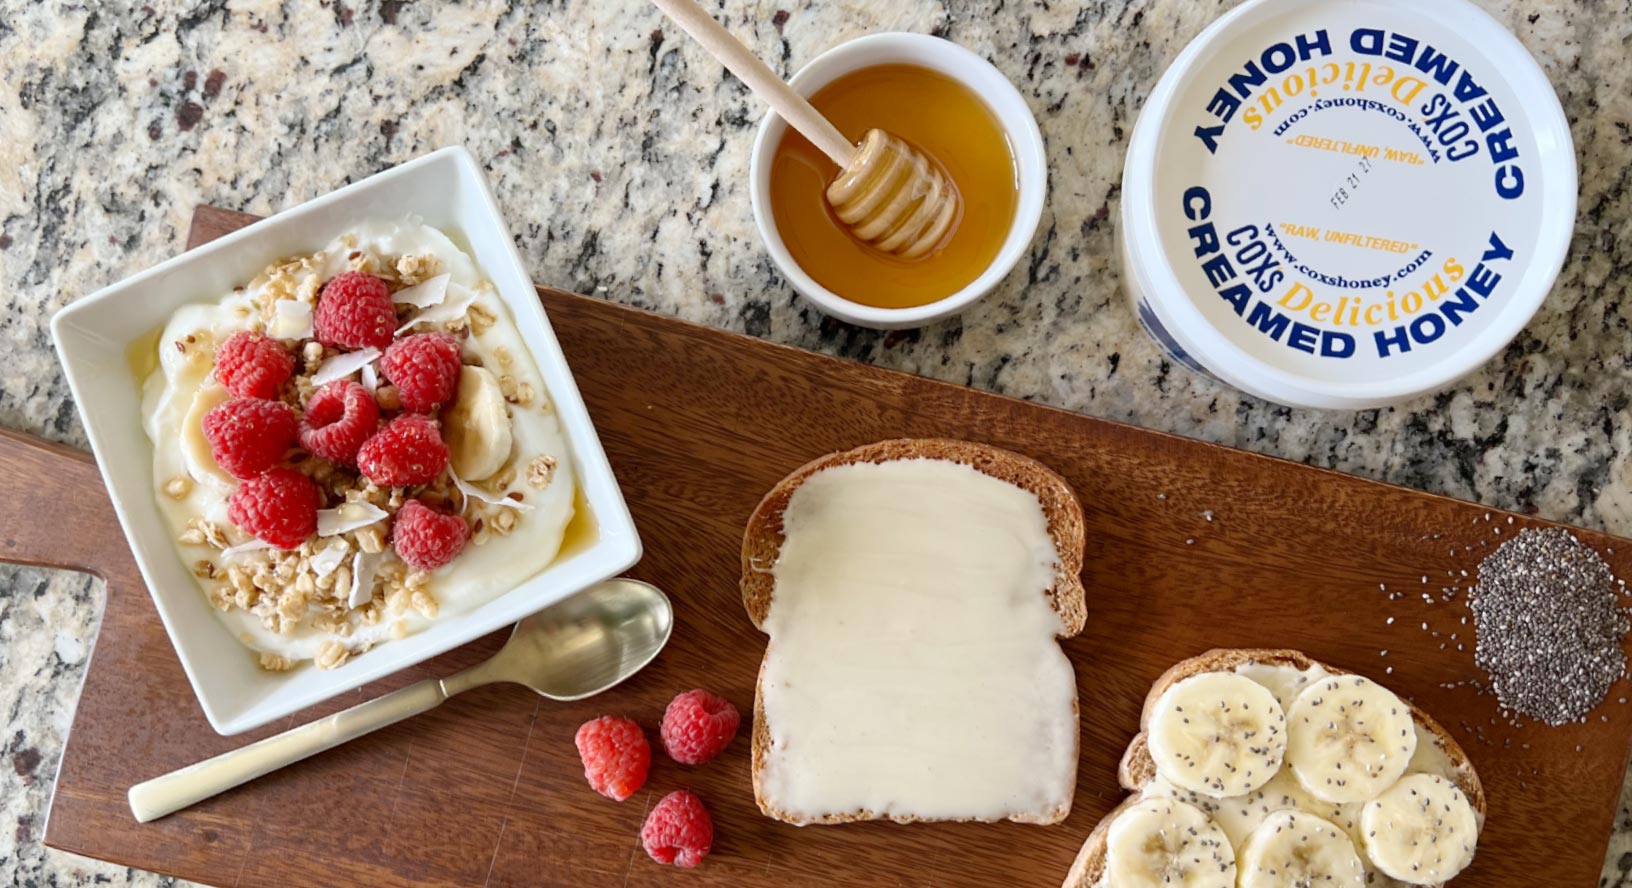 Coxs Honey raw unfiltered honey. Granola with raspberries and honey. Bread with creamed honey and bananas.